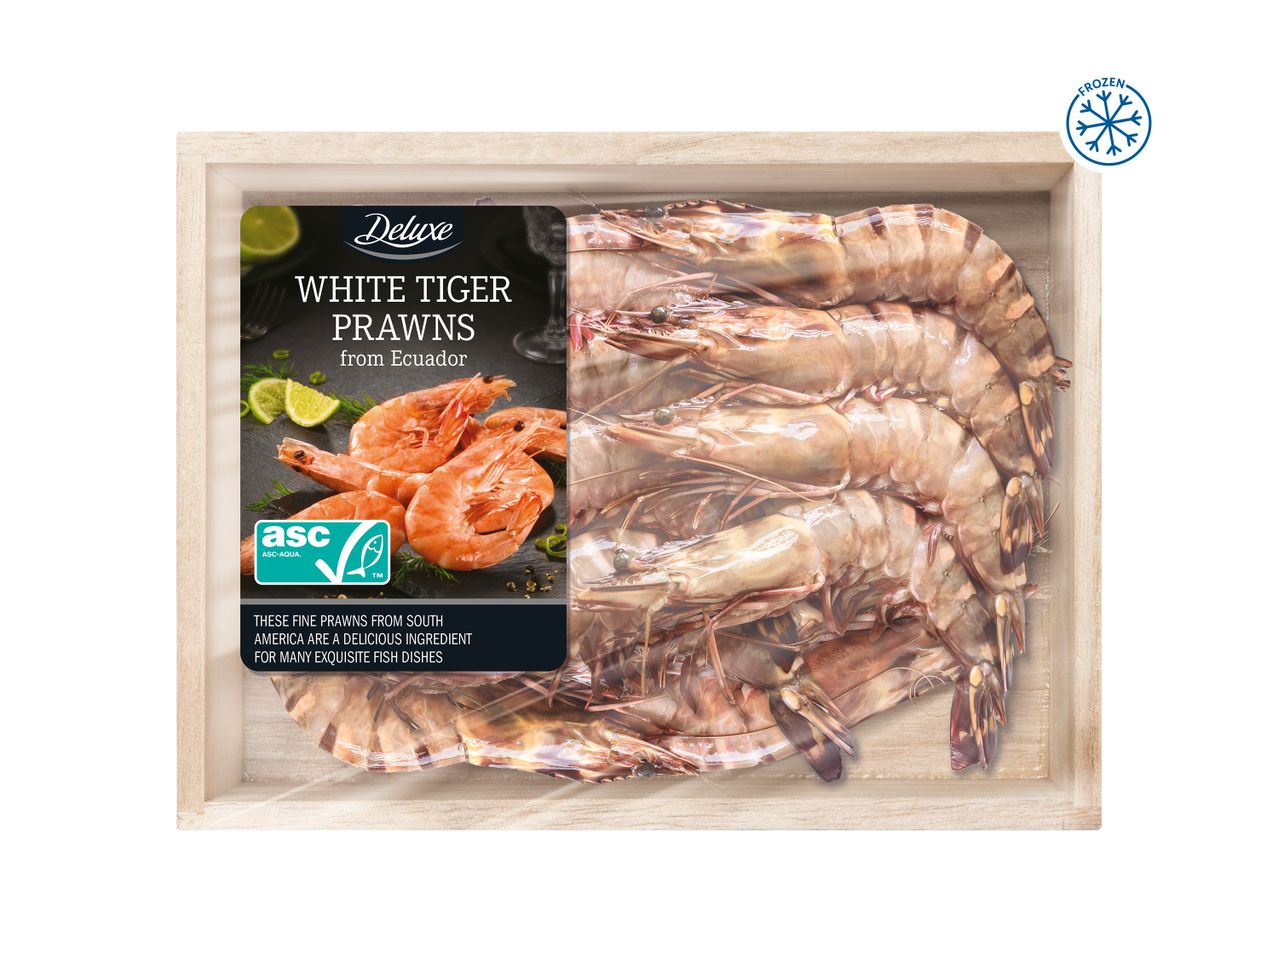 Go to full screen view: Deluxe White Tiger Prawns in Wooden Box - Image 1